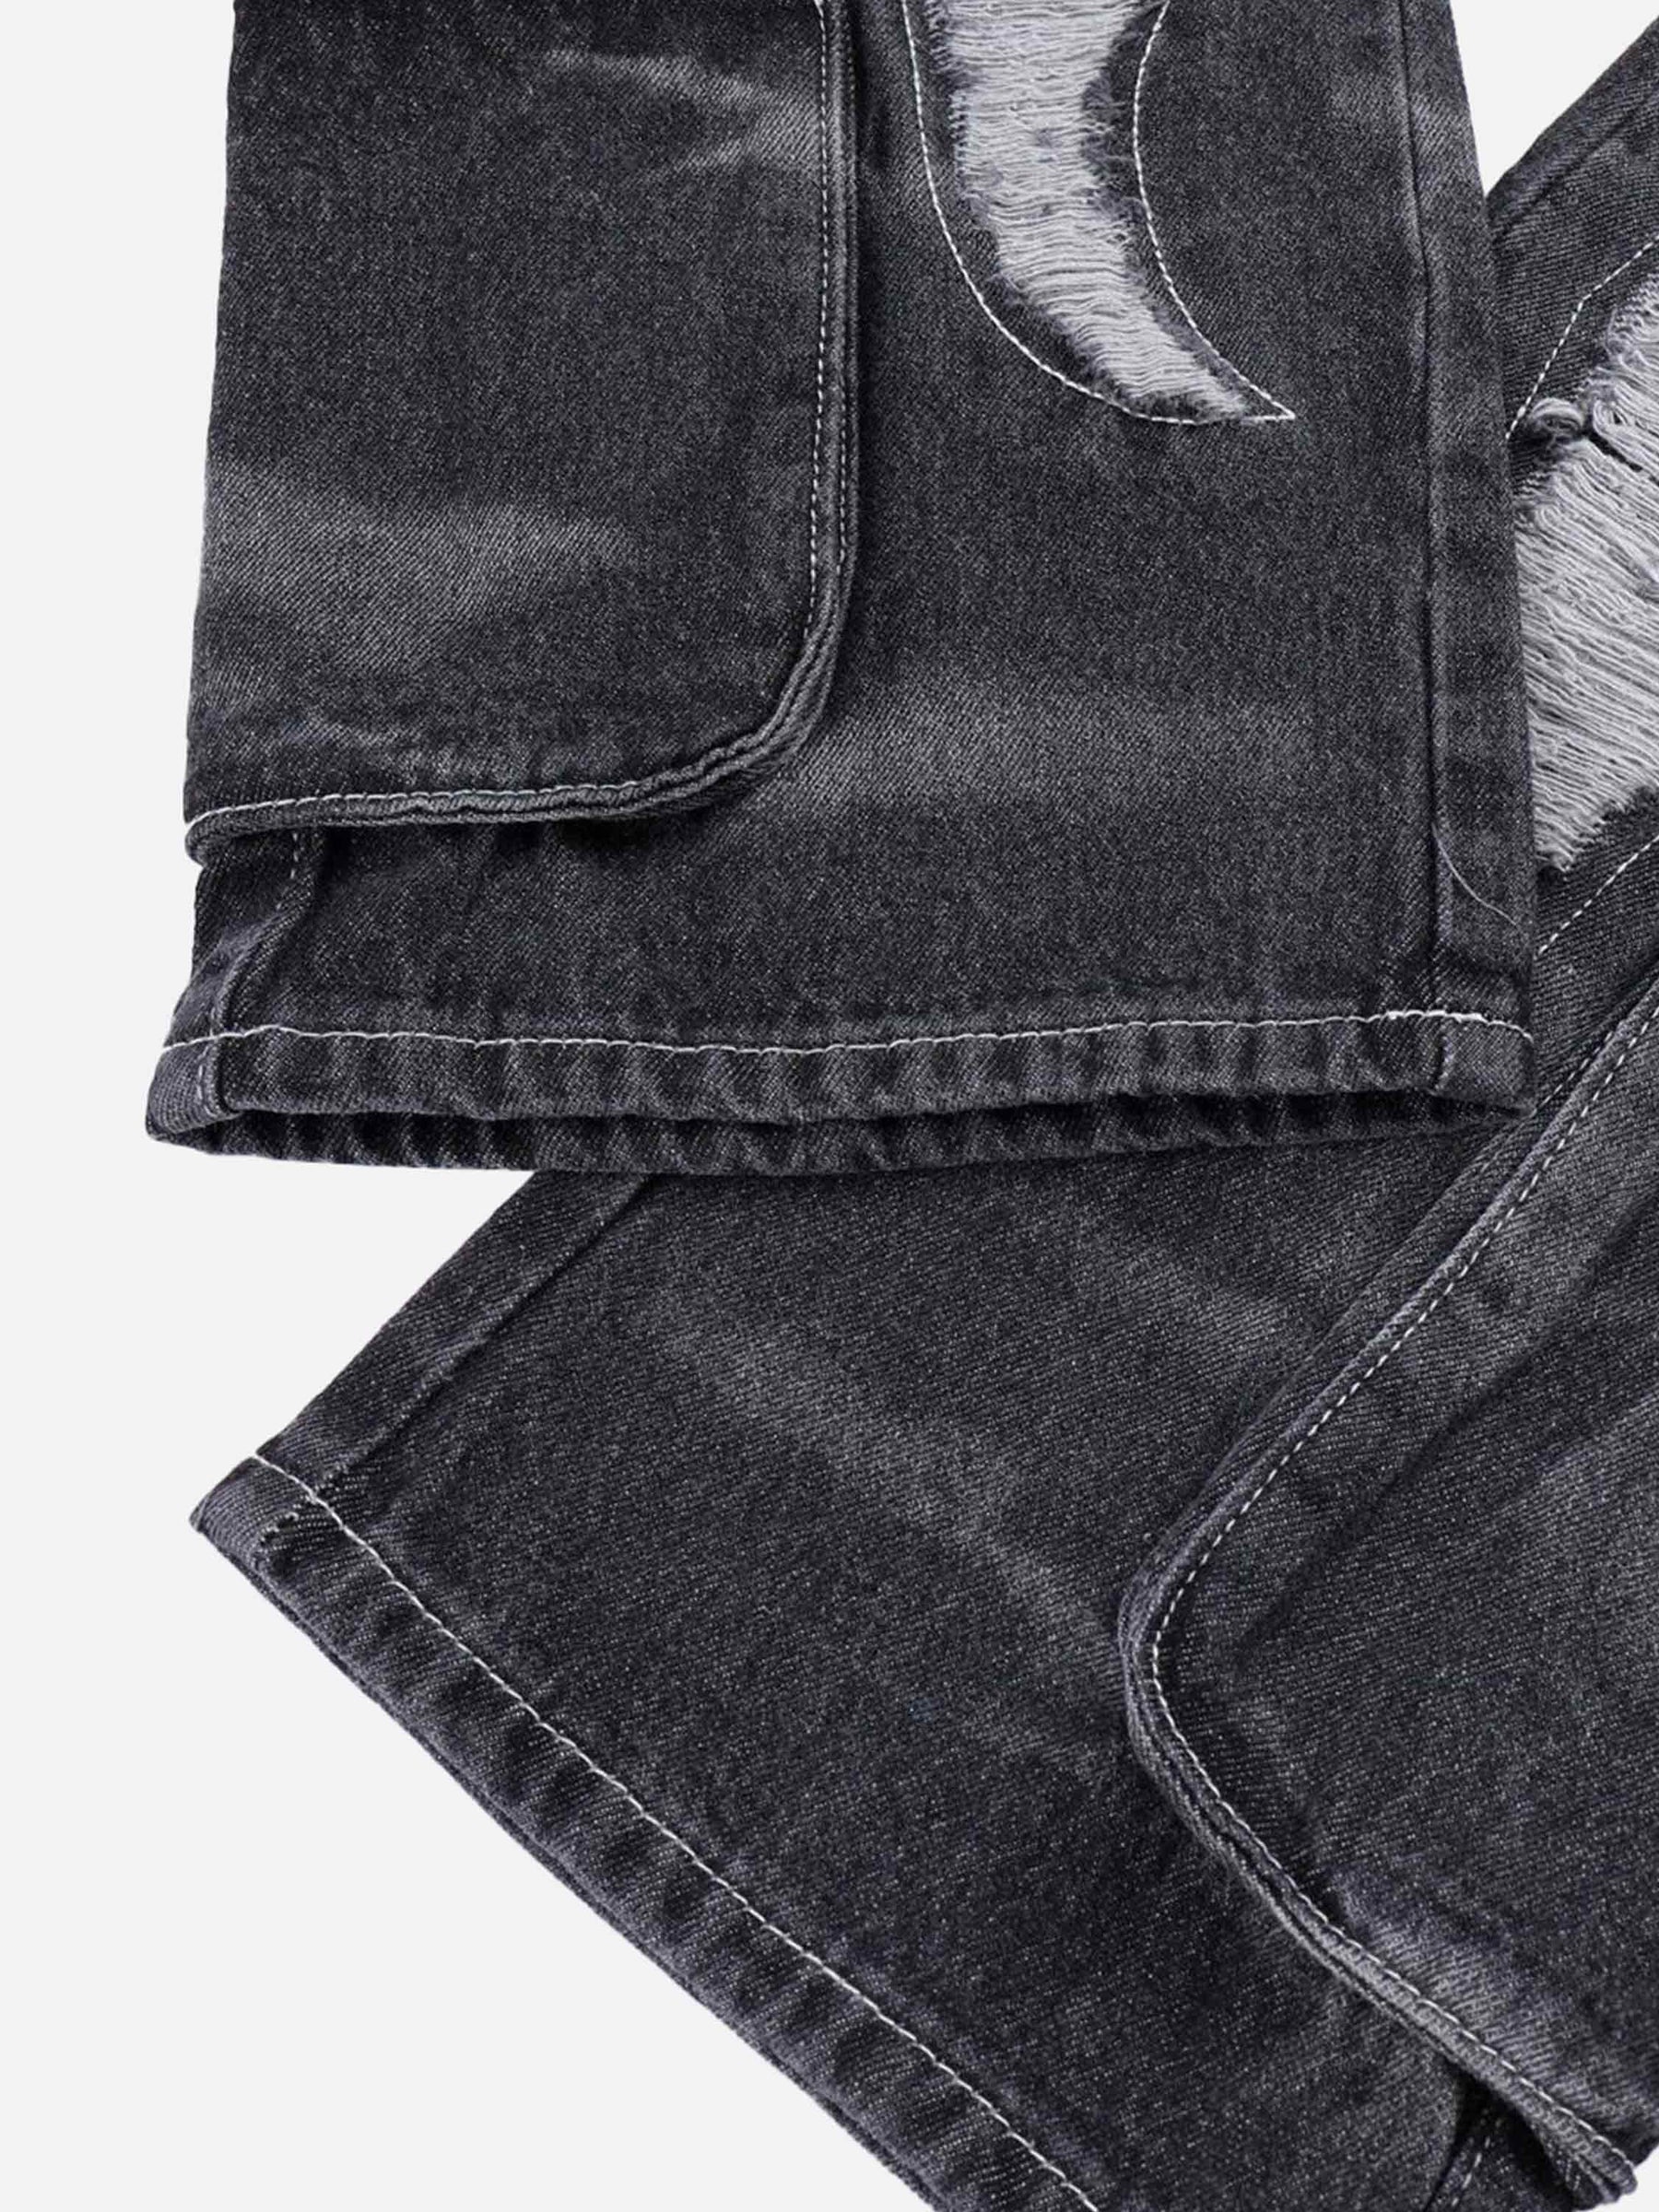 LUXENFY™ - European And American Hip-hop Washed And Torn Jeans luxenfy.com